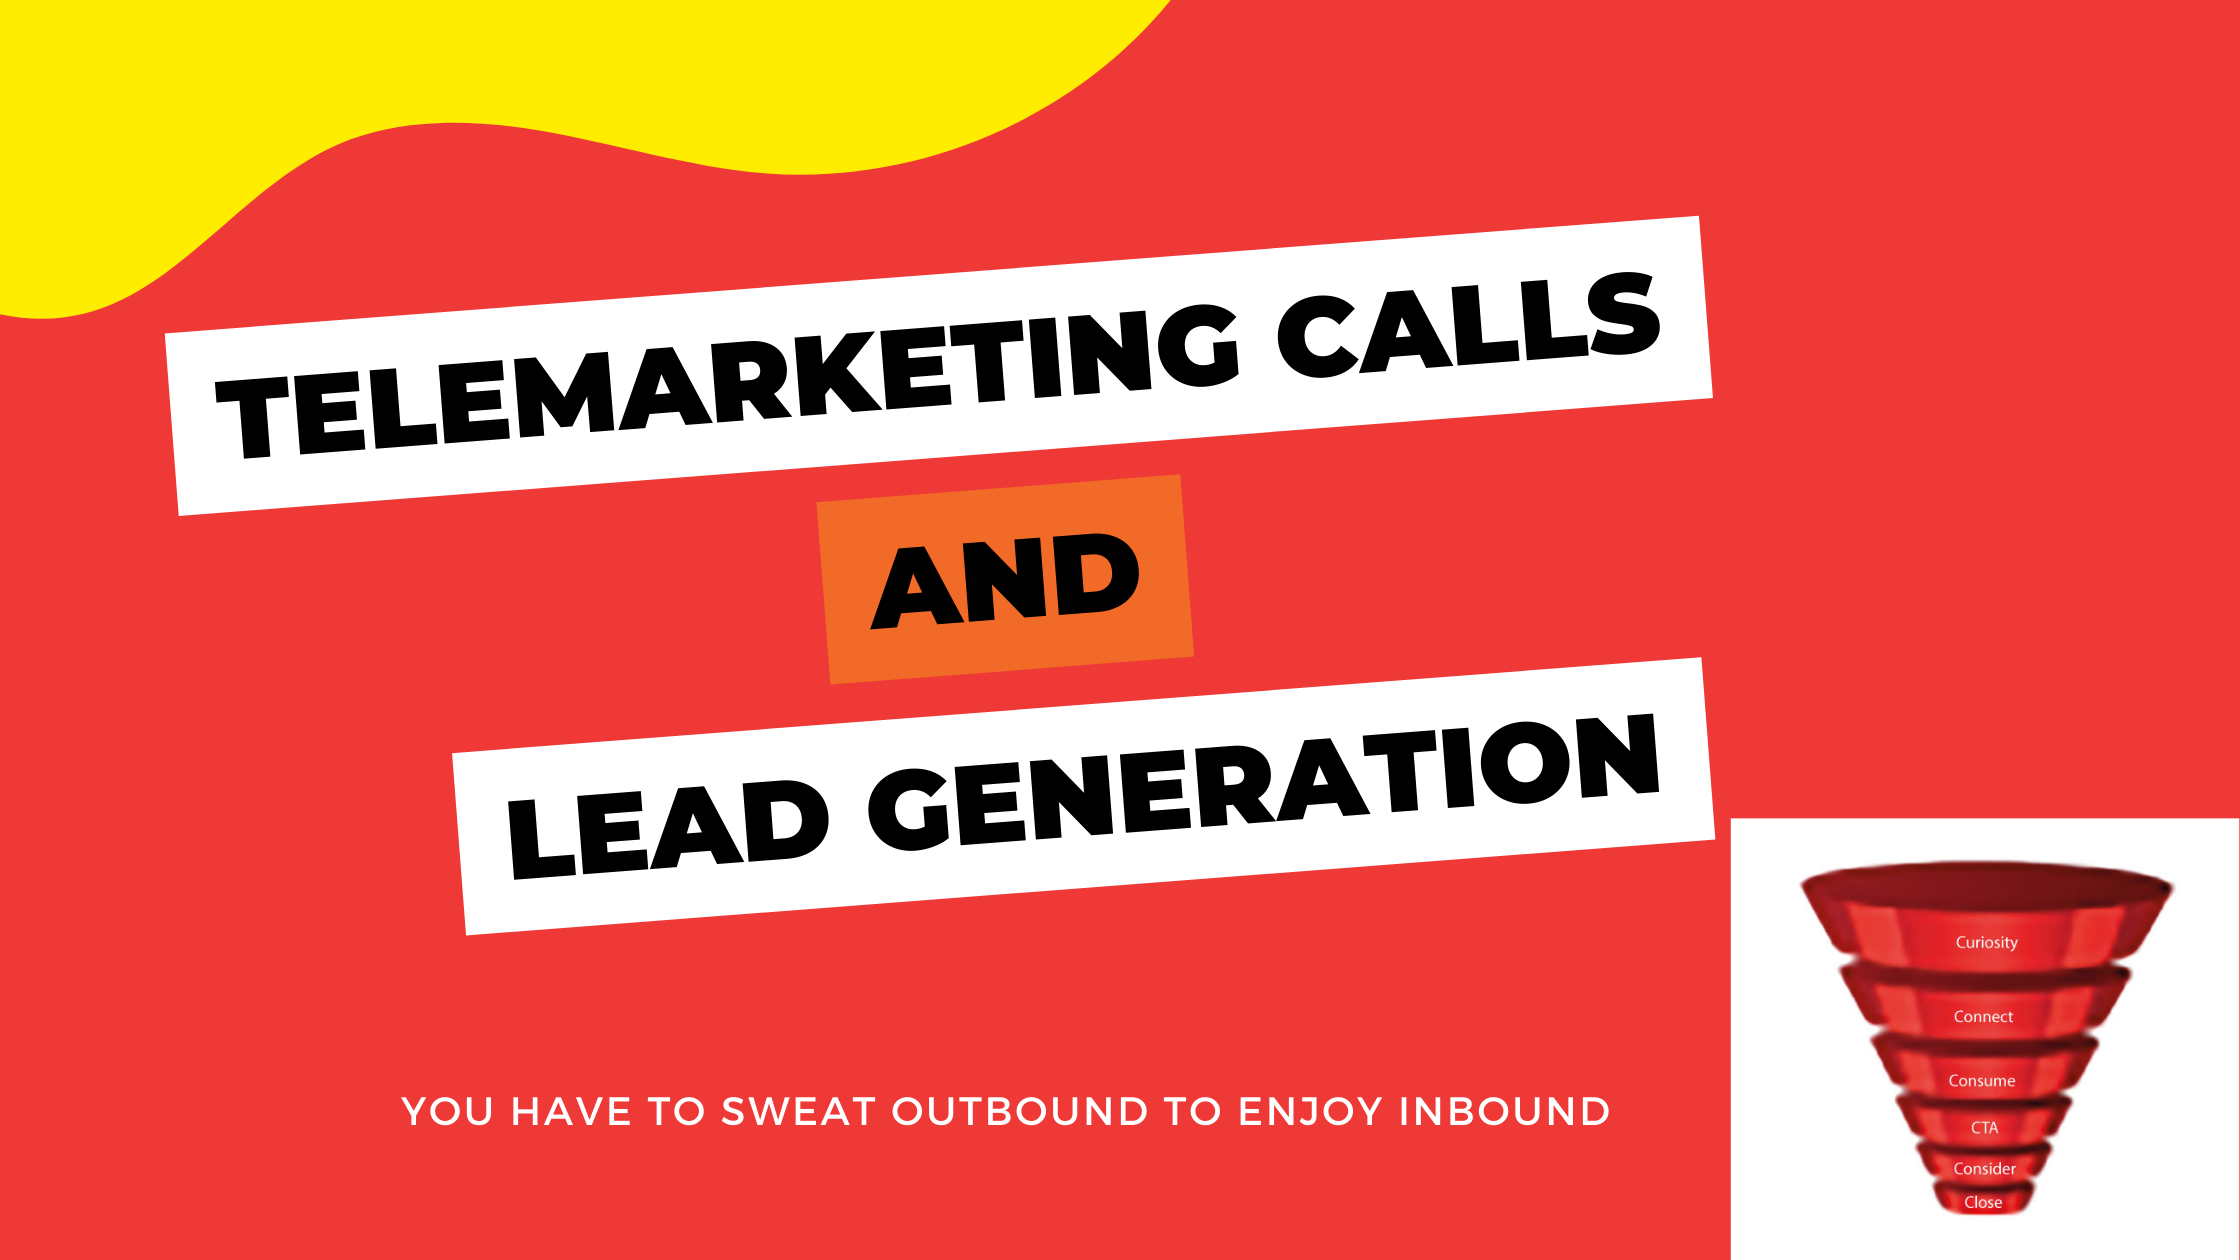 Telemarketing is vital in a lead generation campaign from qualifying to reengaging lapsed clients